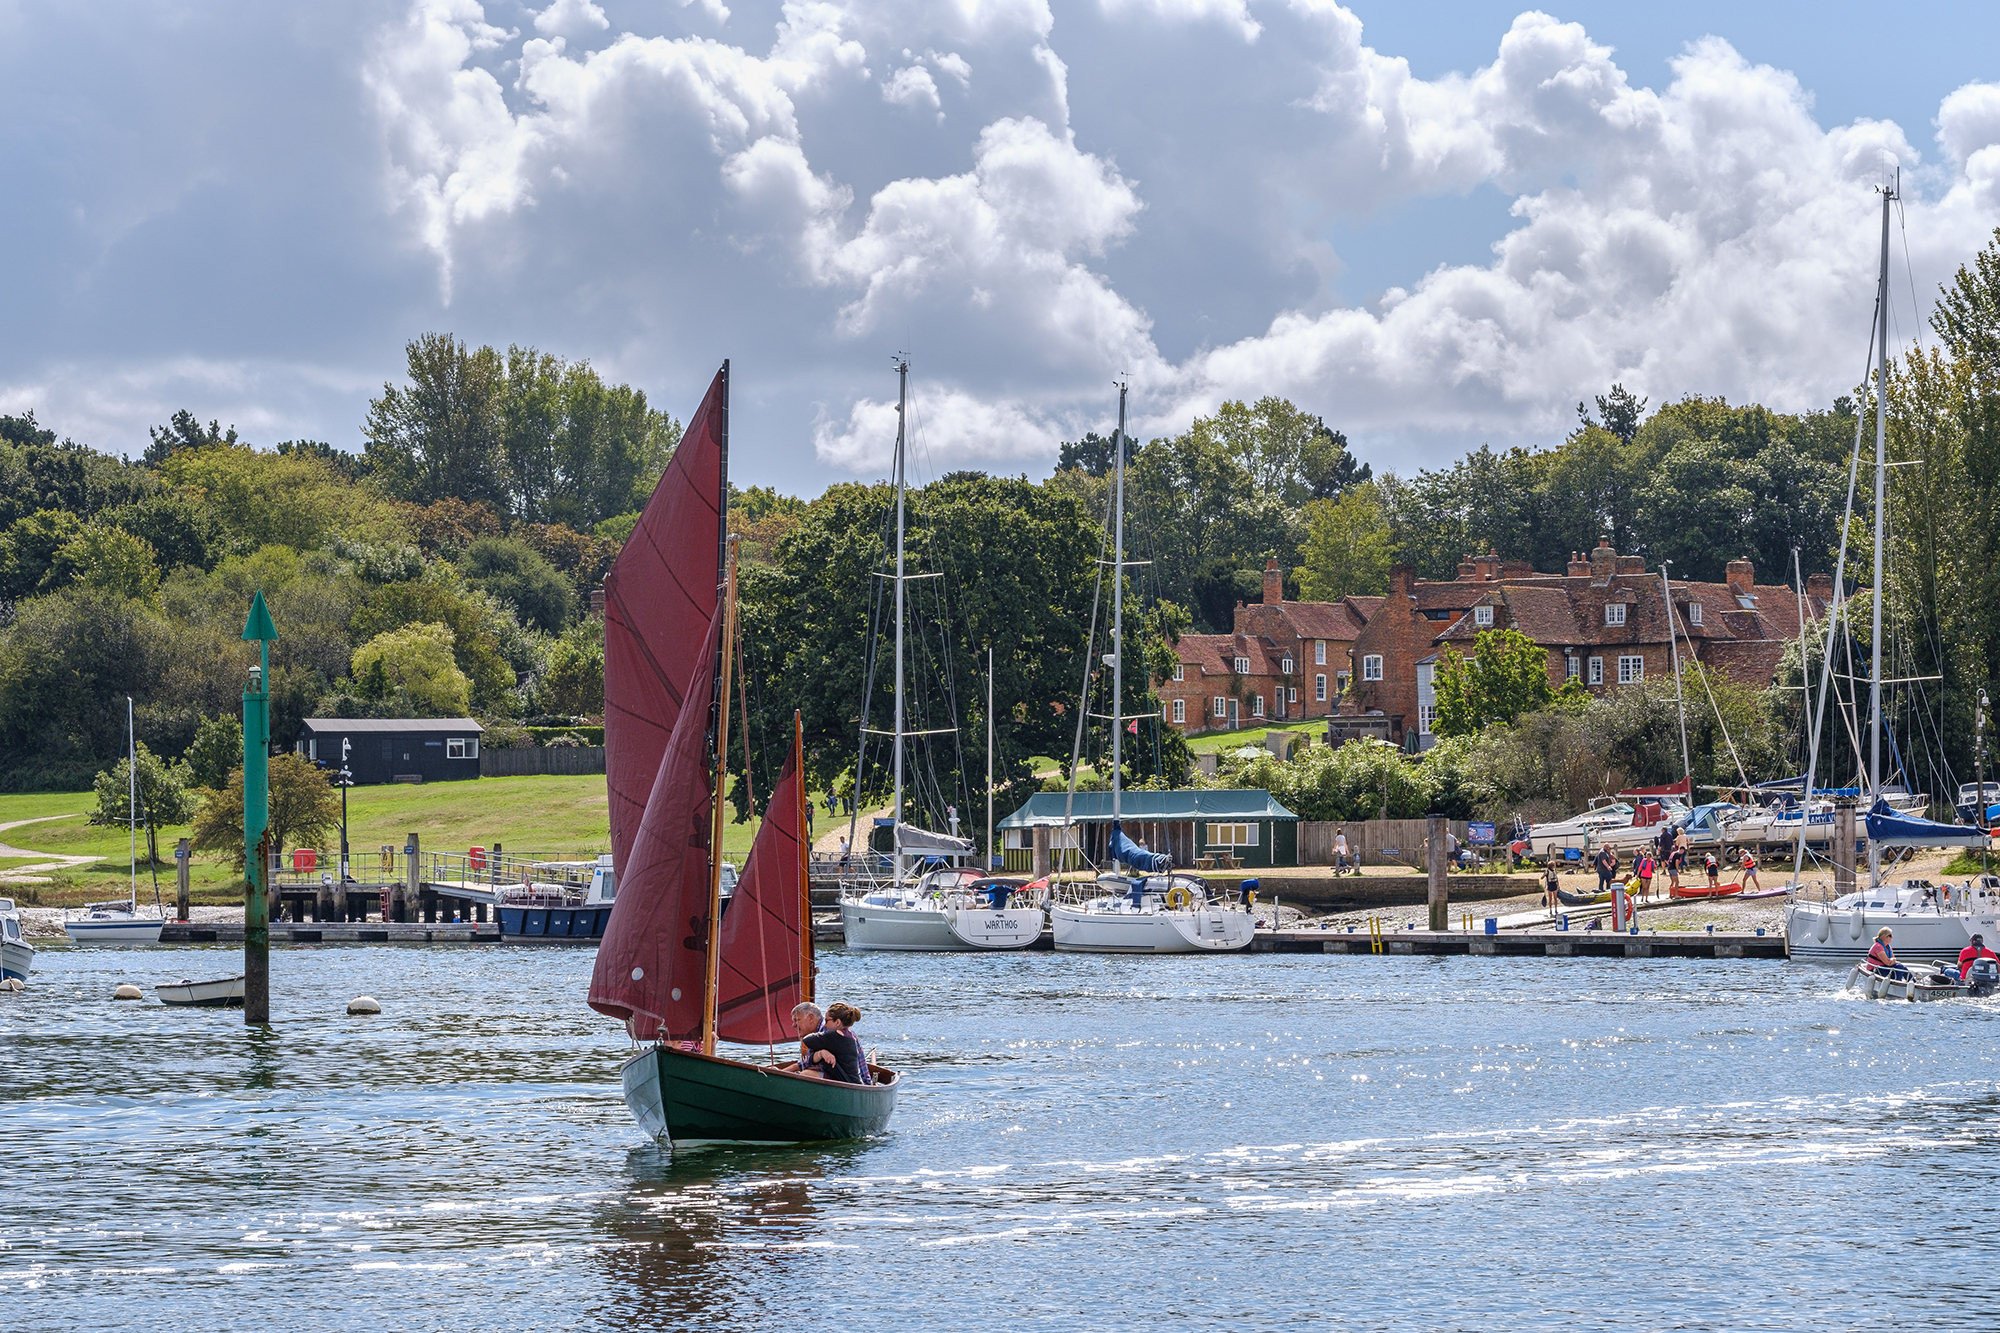 Boat sailing past Buckler's Hard Village on the Beaulieu River